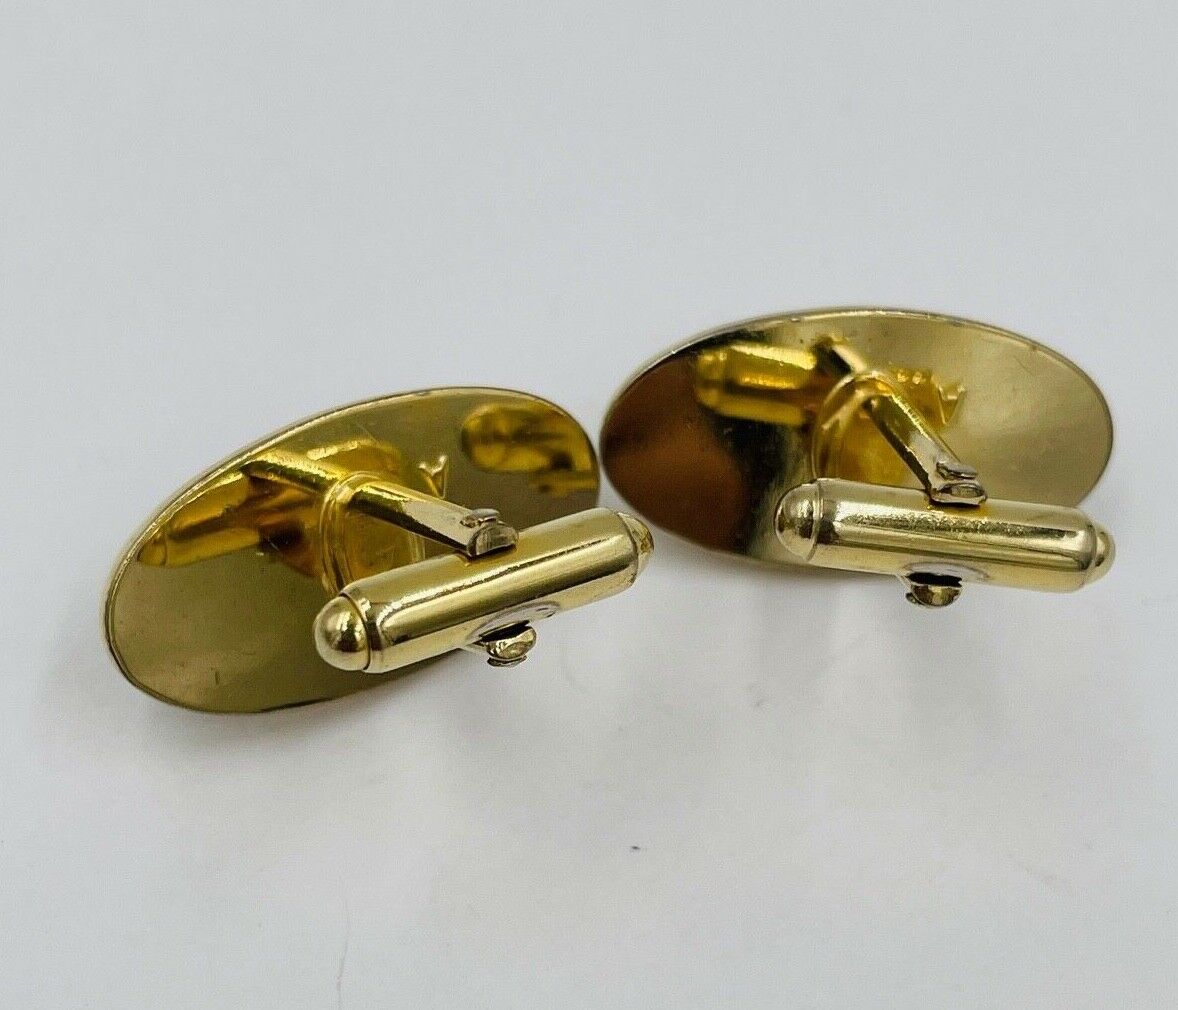 Anson Vintage Dog Cuflinks Mother of Pearl Oval Classy Cuff Links